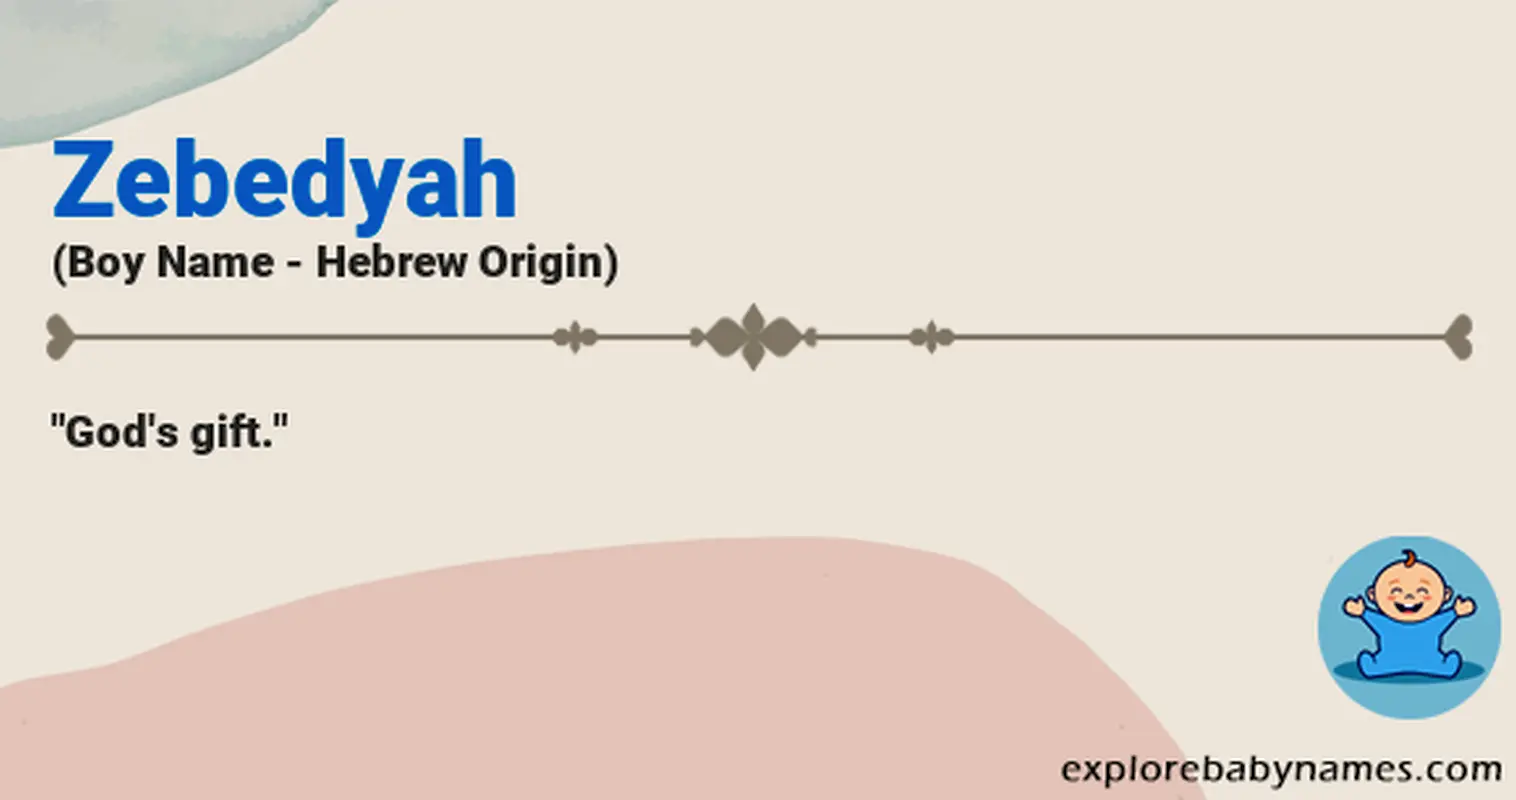 Meaning of Zebedyah